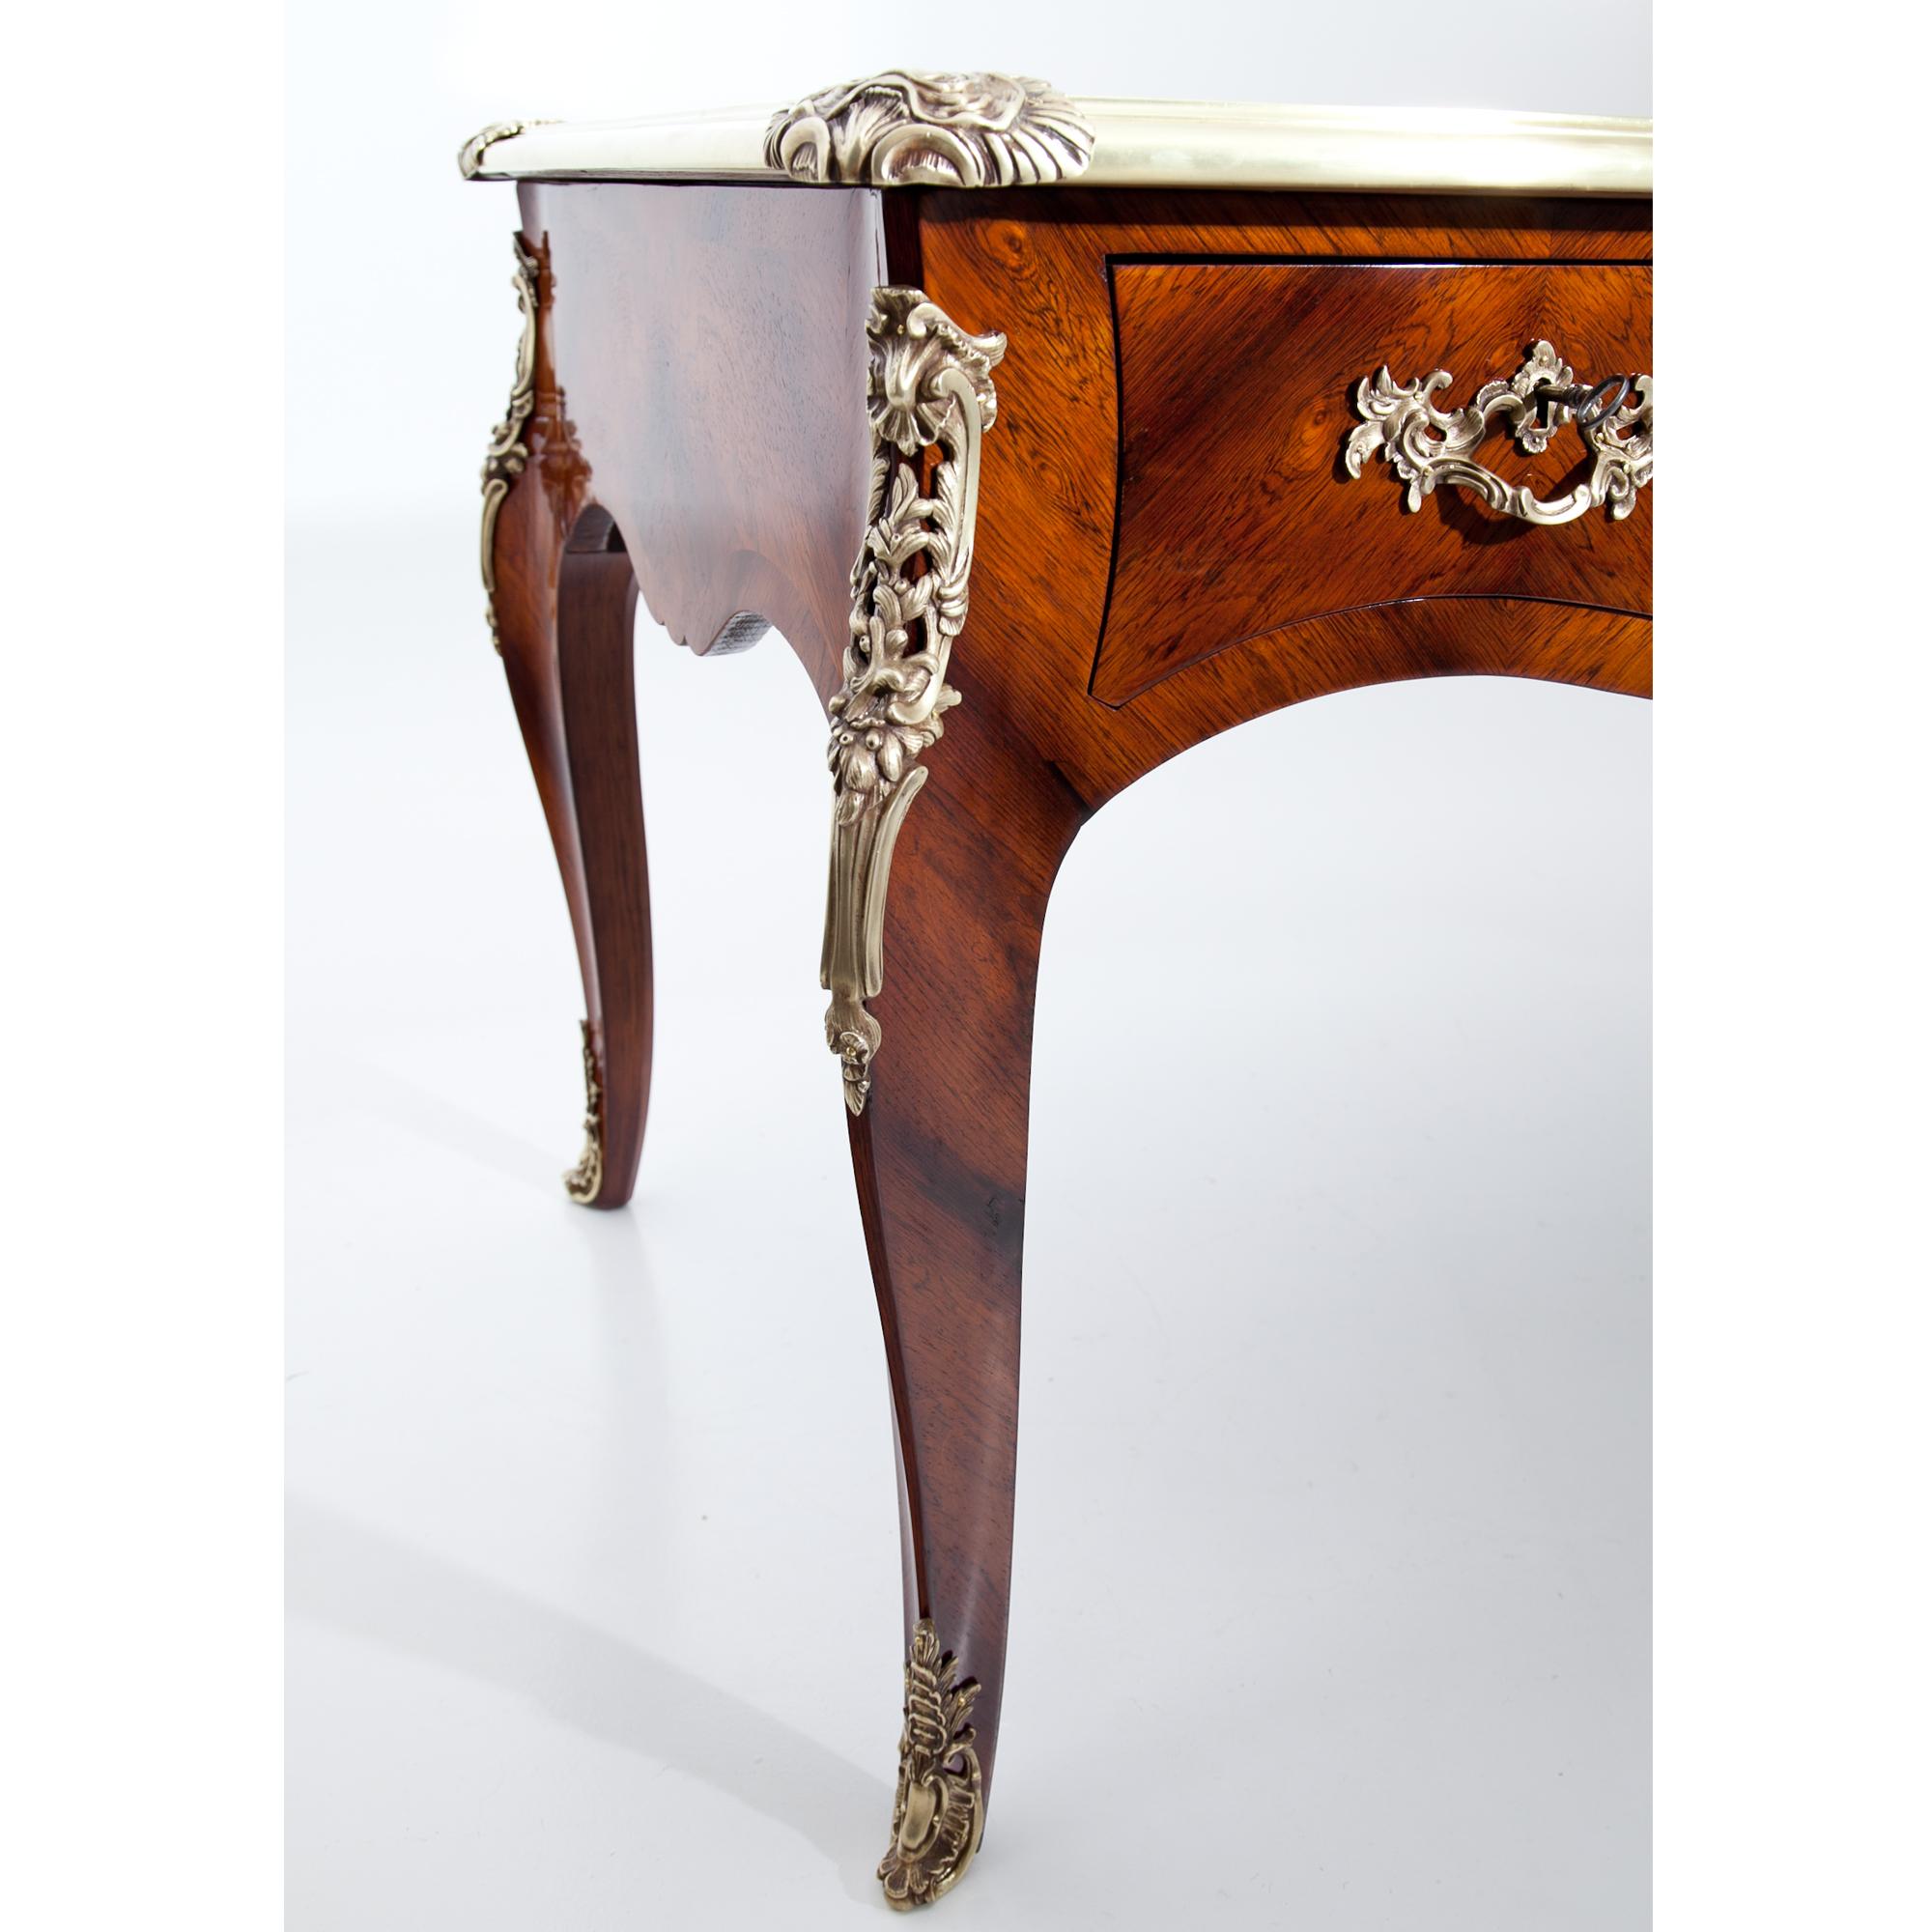 Large Louis-Quinze-style desk in mahogany veneered. The writing surface is covered in brown leather, the edges are decorated with brass profiles. The desk has three drawers, which are imitated on the back. The curved legs show decorative fittings in